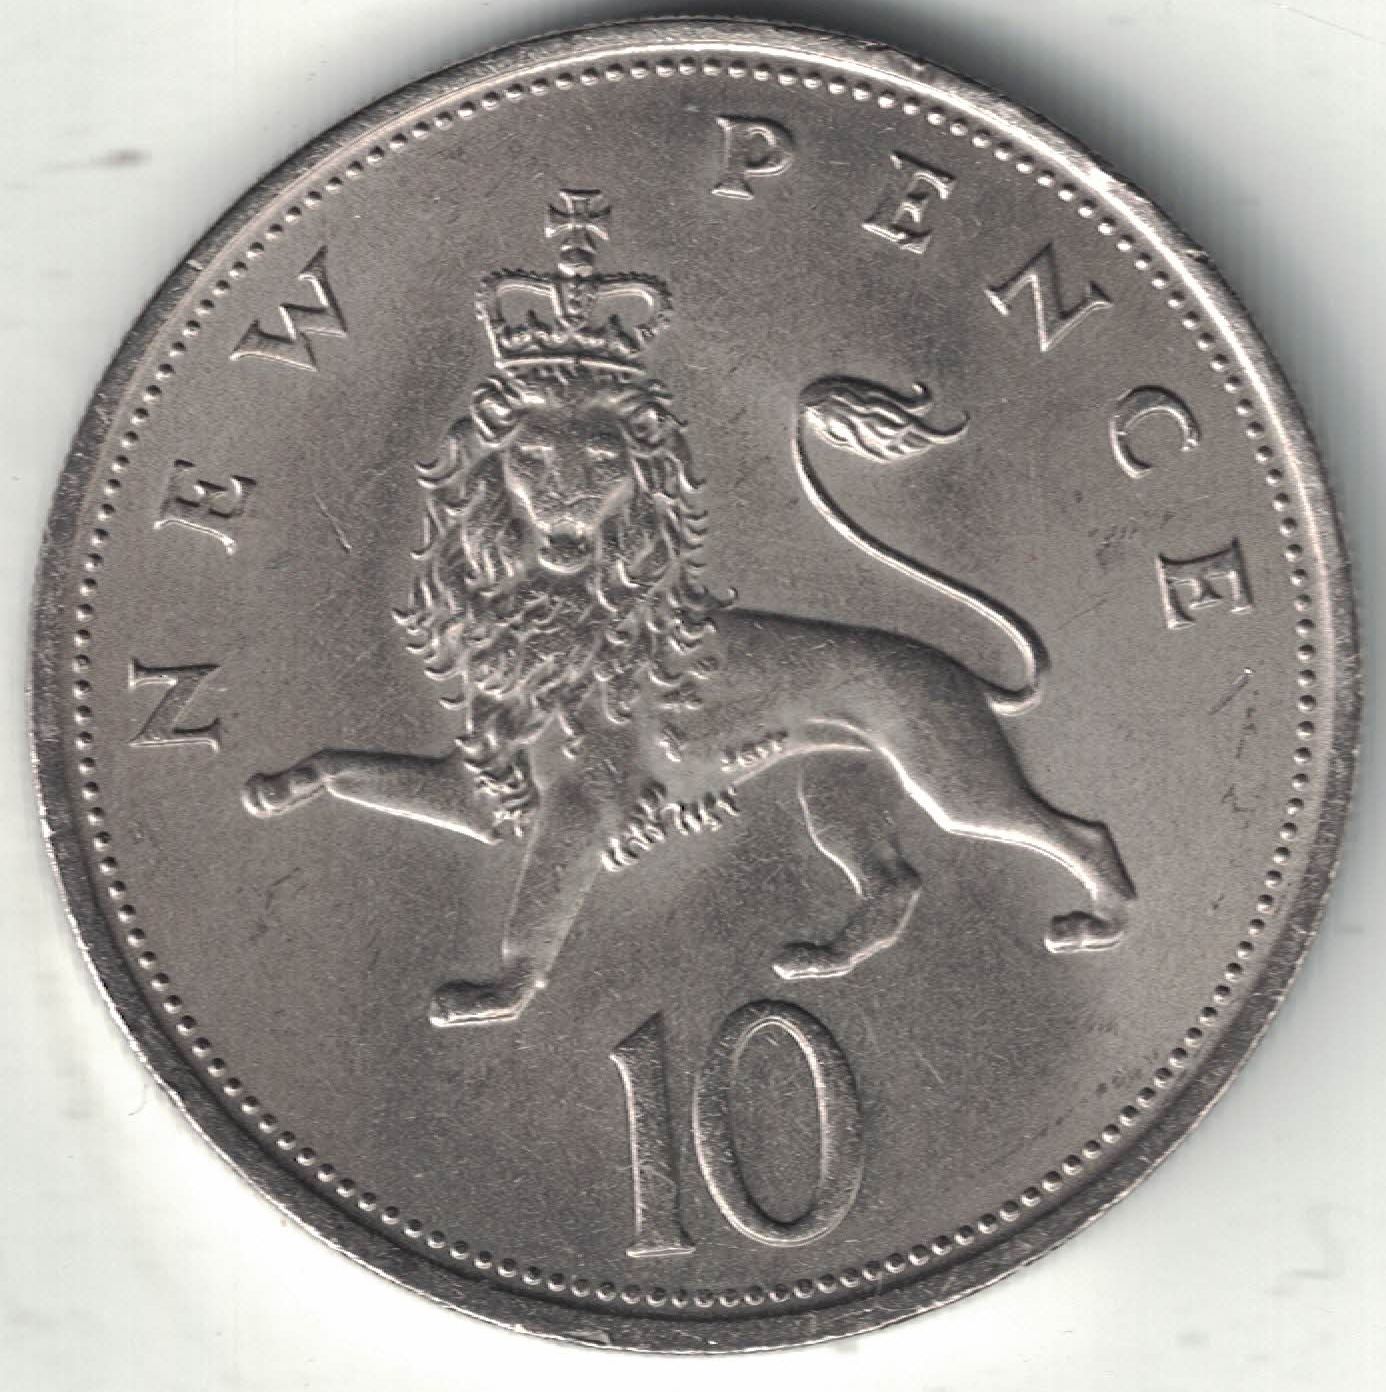 British 10 Pence Old Coin